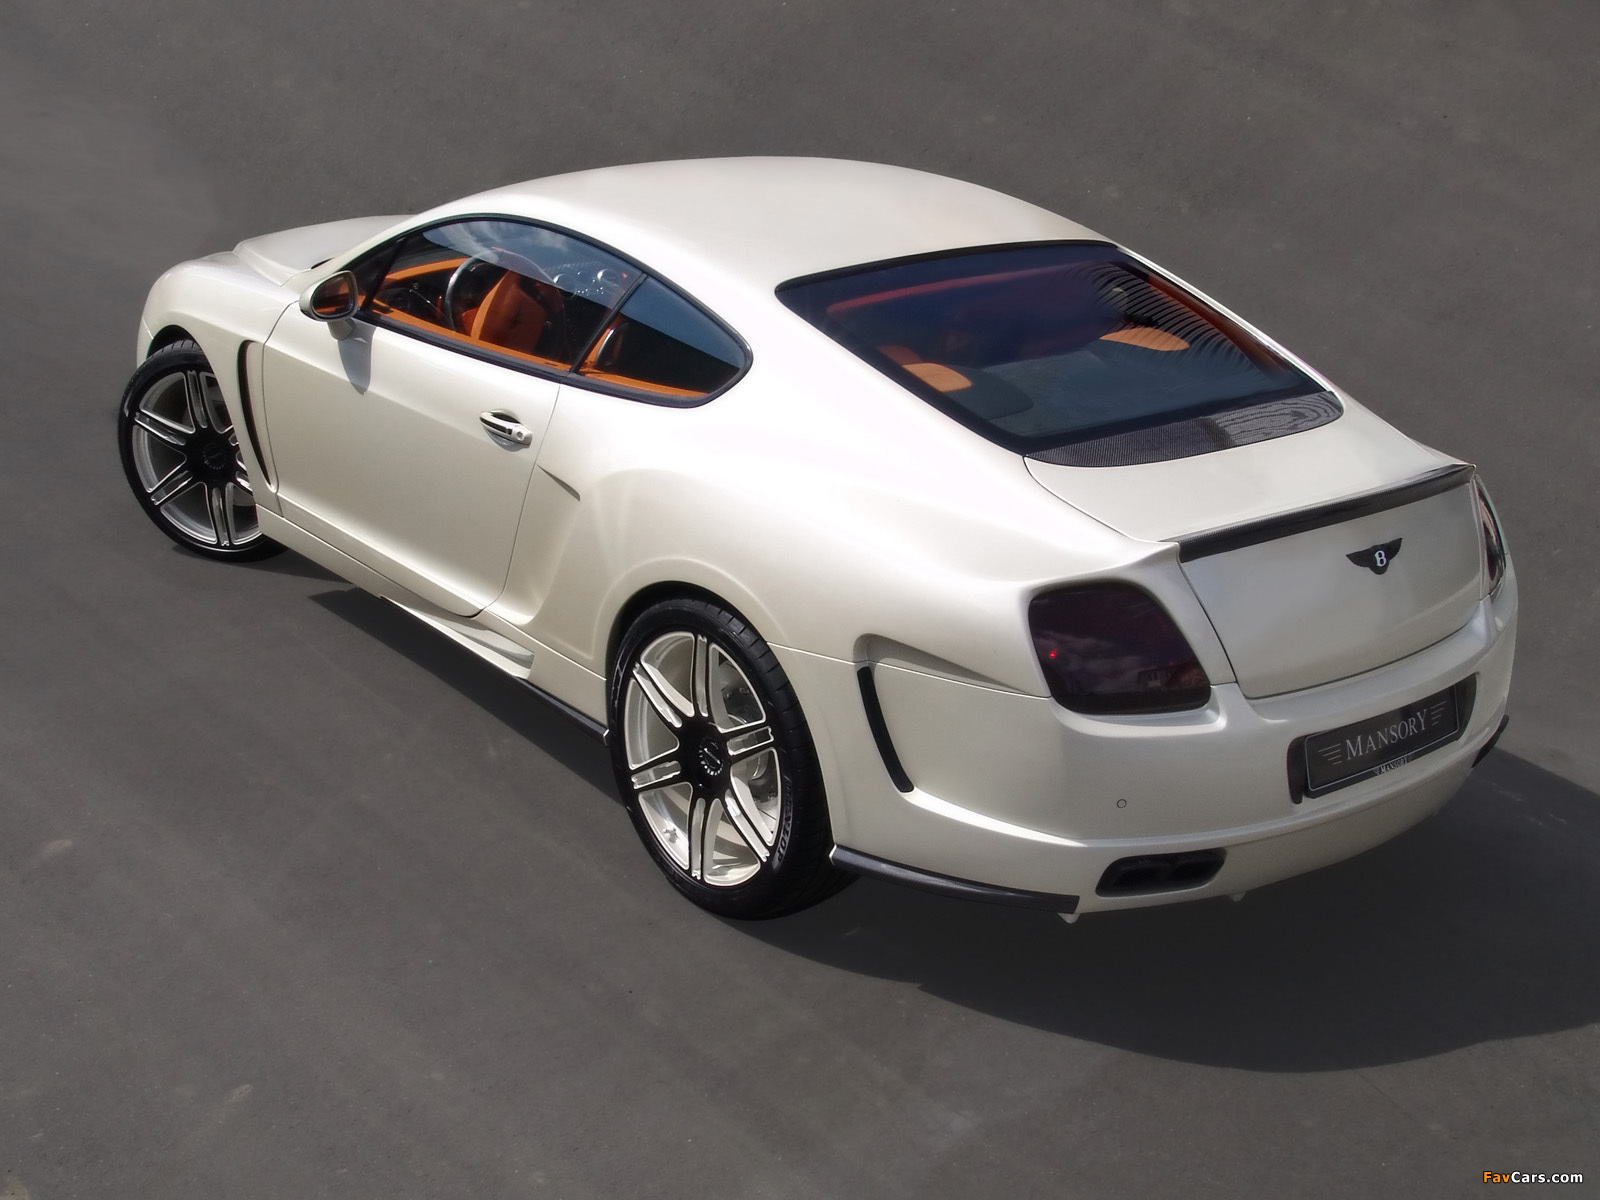 Mansory Bentley Continental GT wallpapers (1600 x 1200)